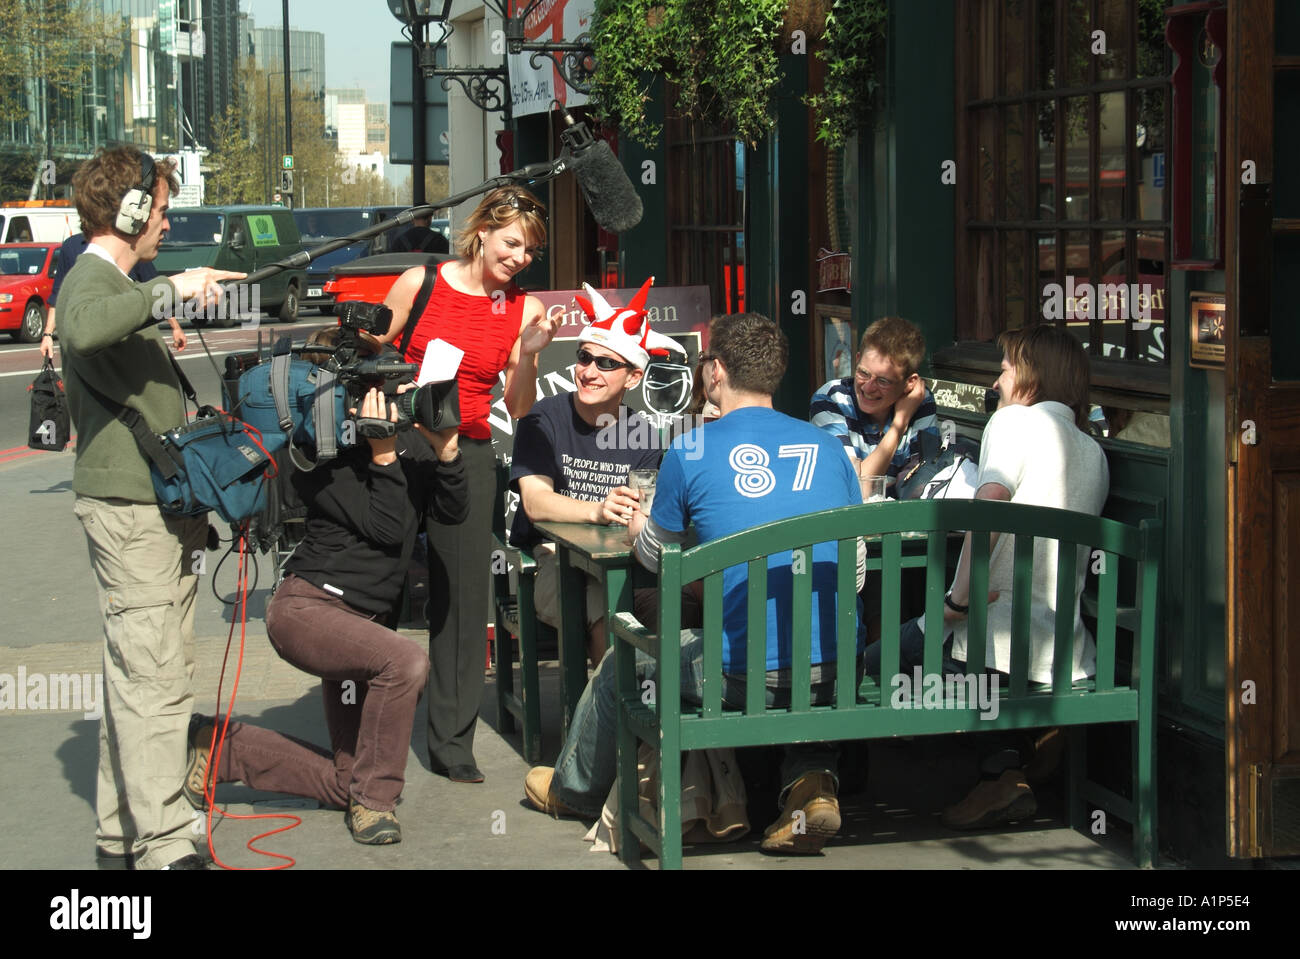 London youngsters at outdoor pub table being interviewed by video crew possibly for TV at time of football tournaments Stock Photo